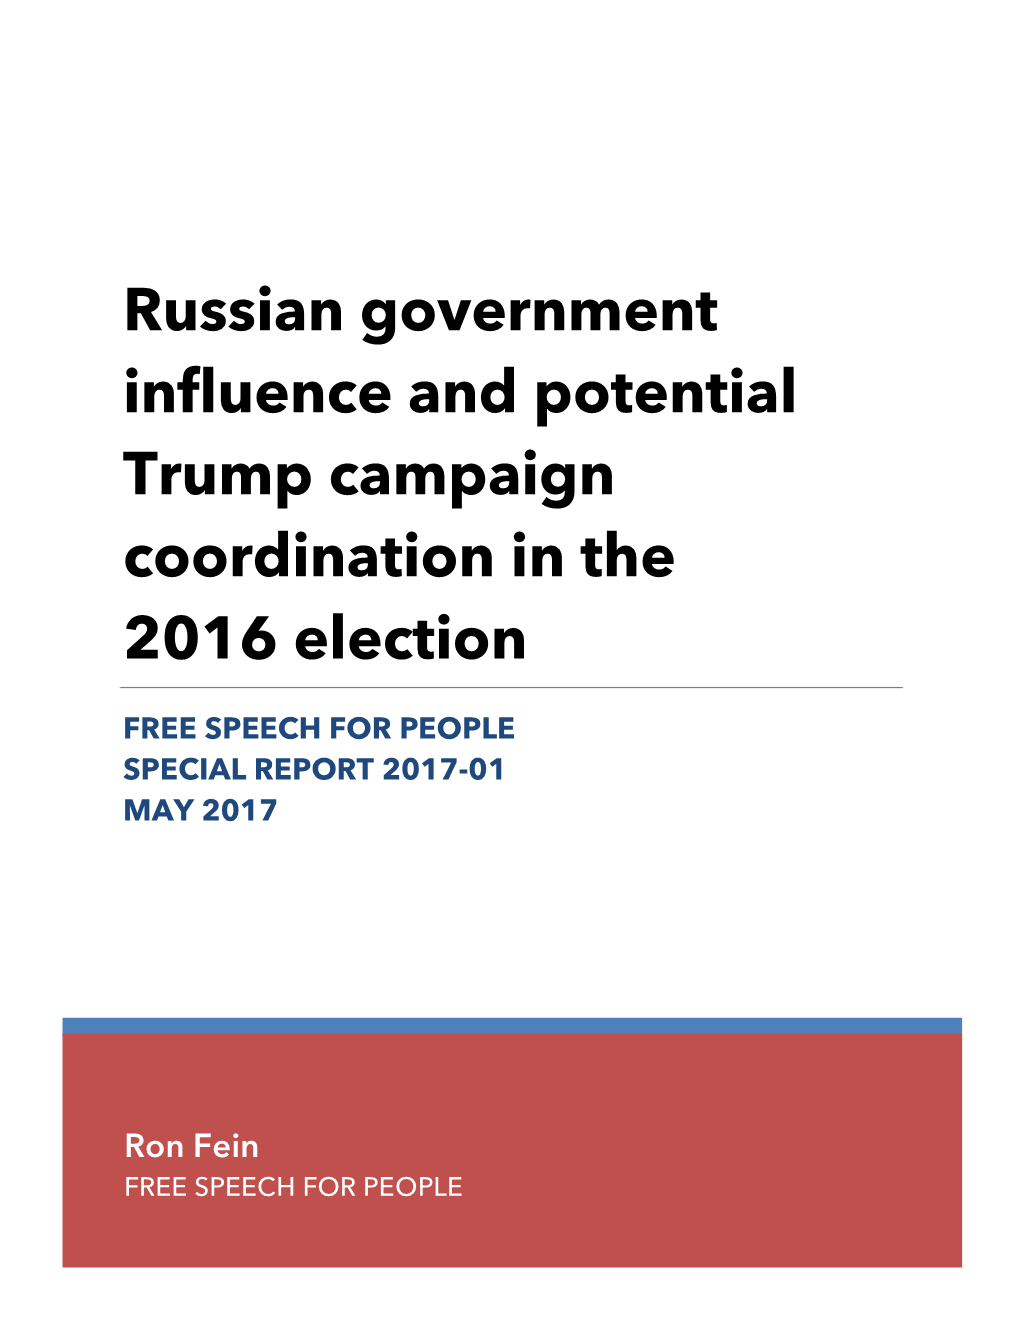 Russian Government Influence and Potential Trump Campaign Coordination in the 2016 Election